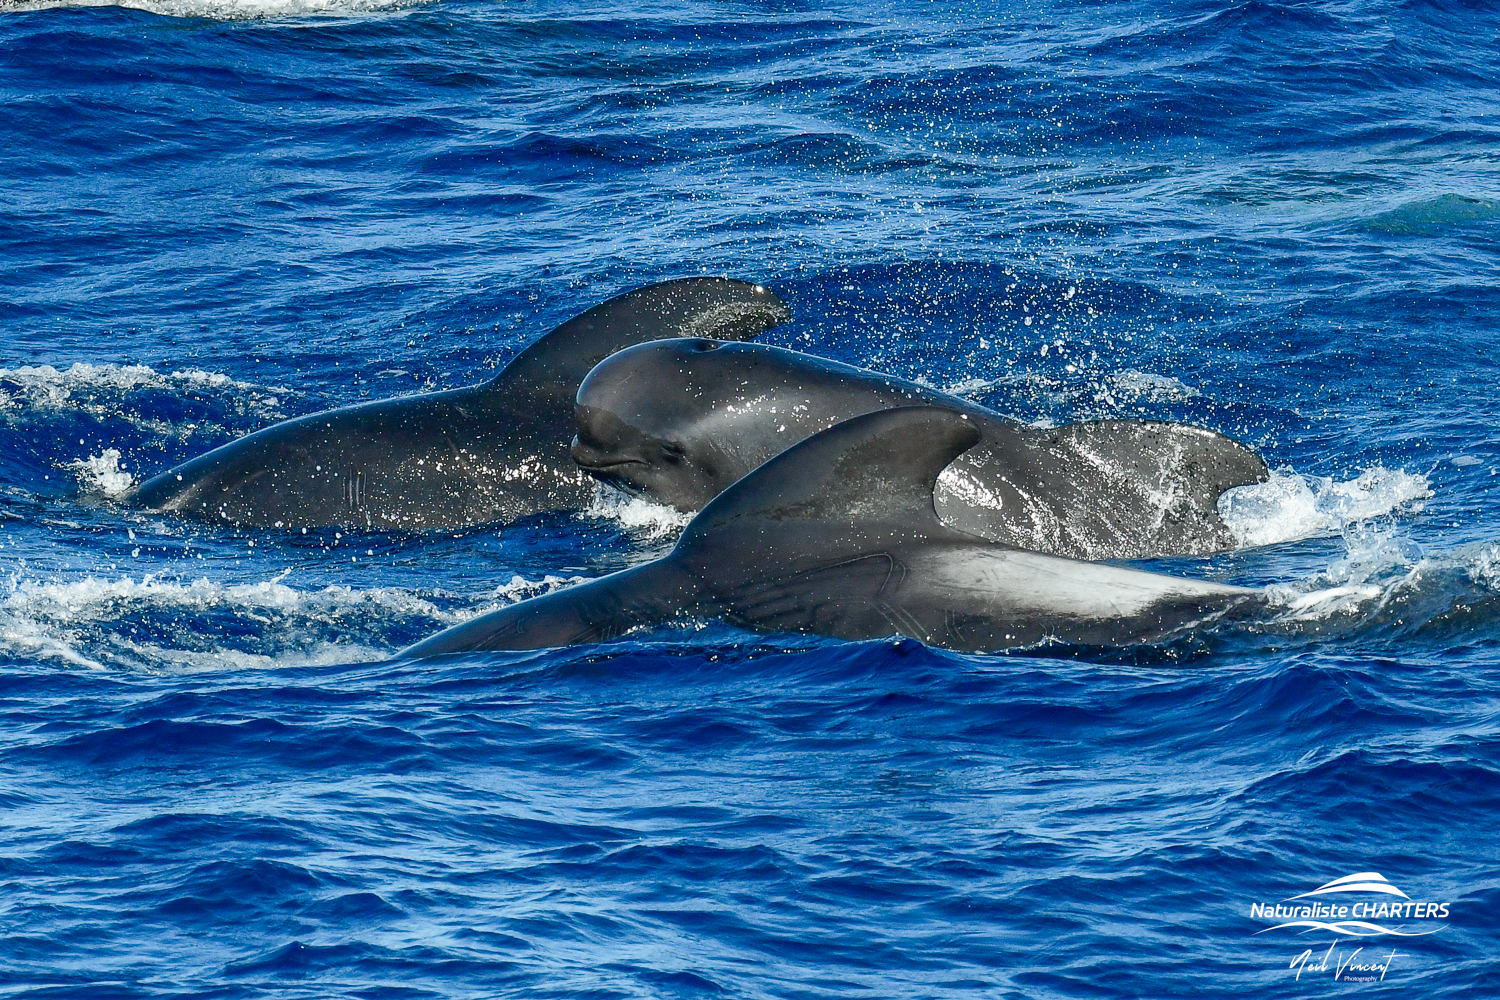 Pilot whales in great numbers roaming Bremer Canyon